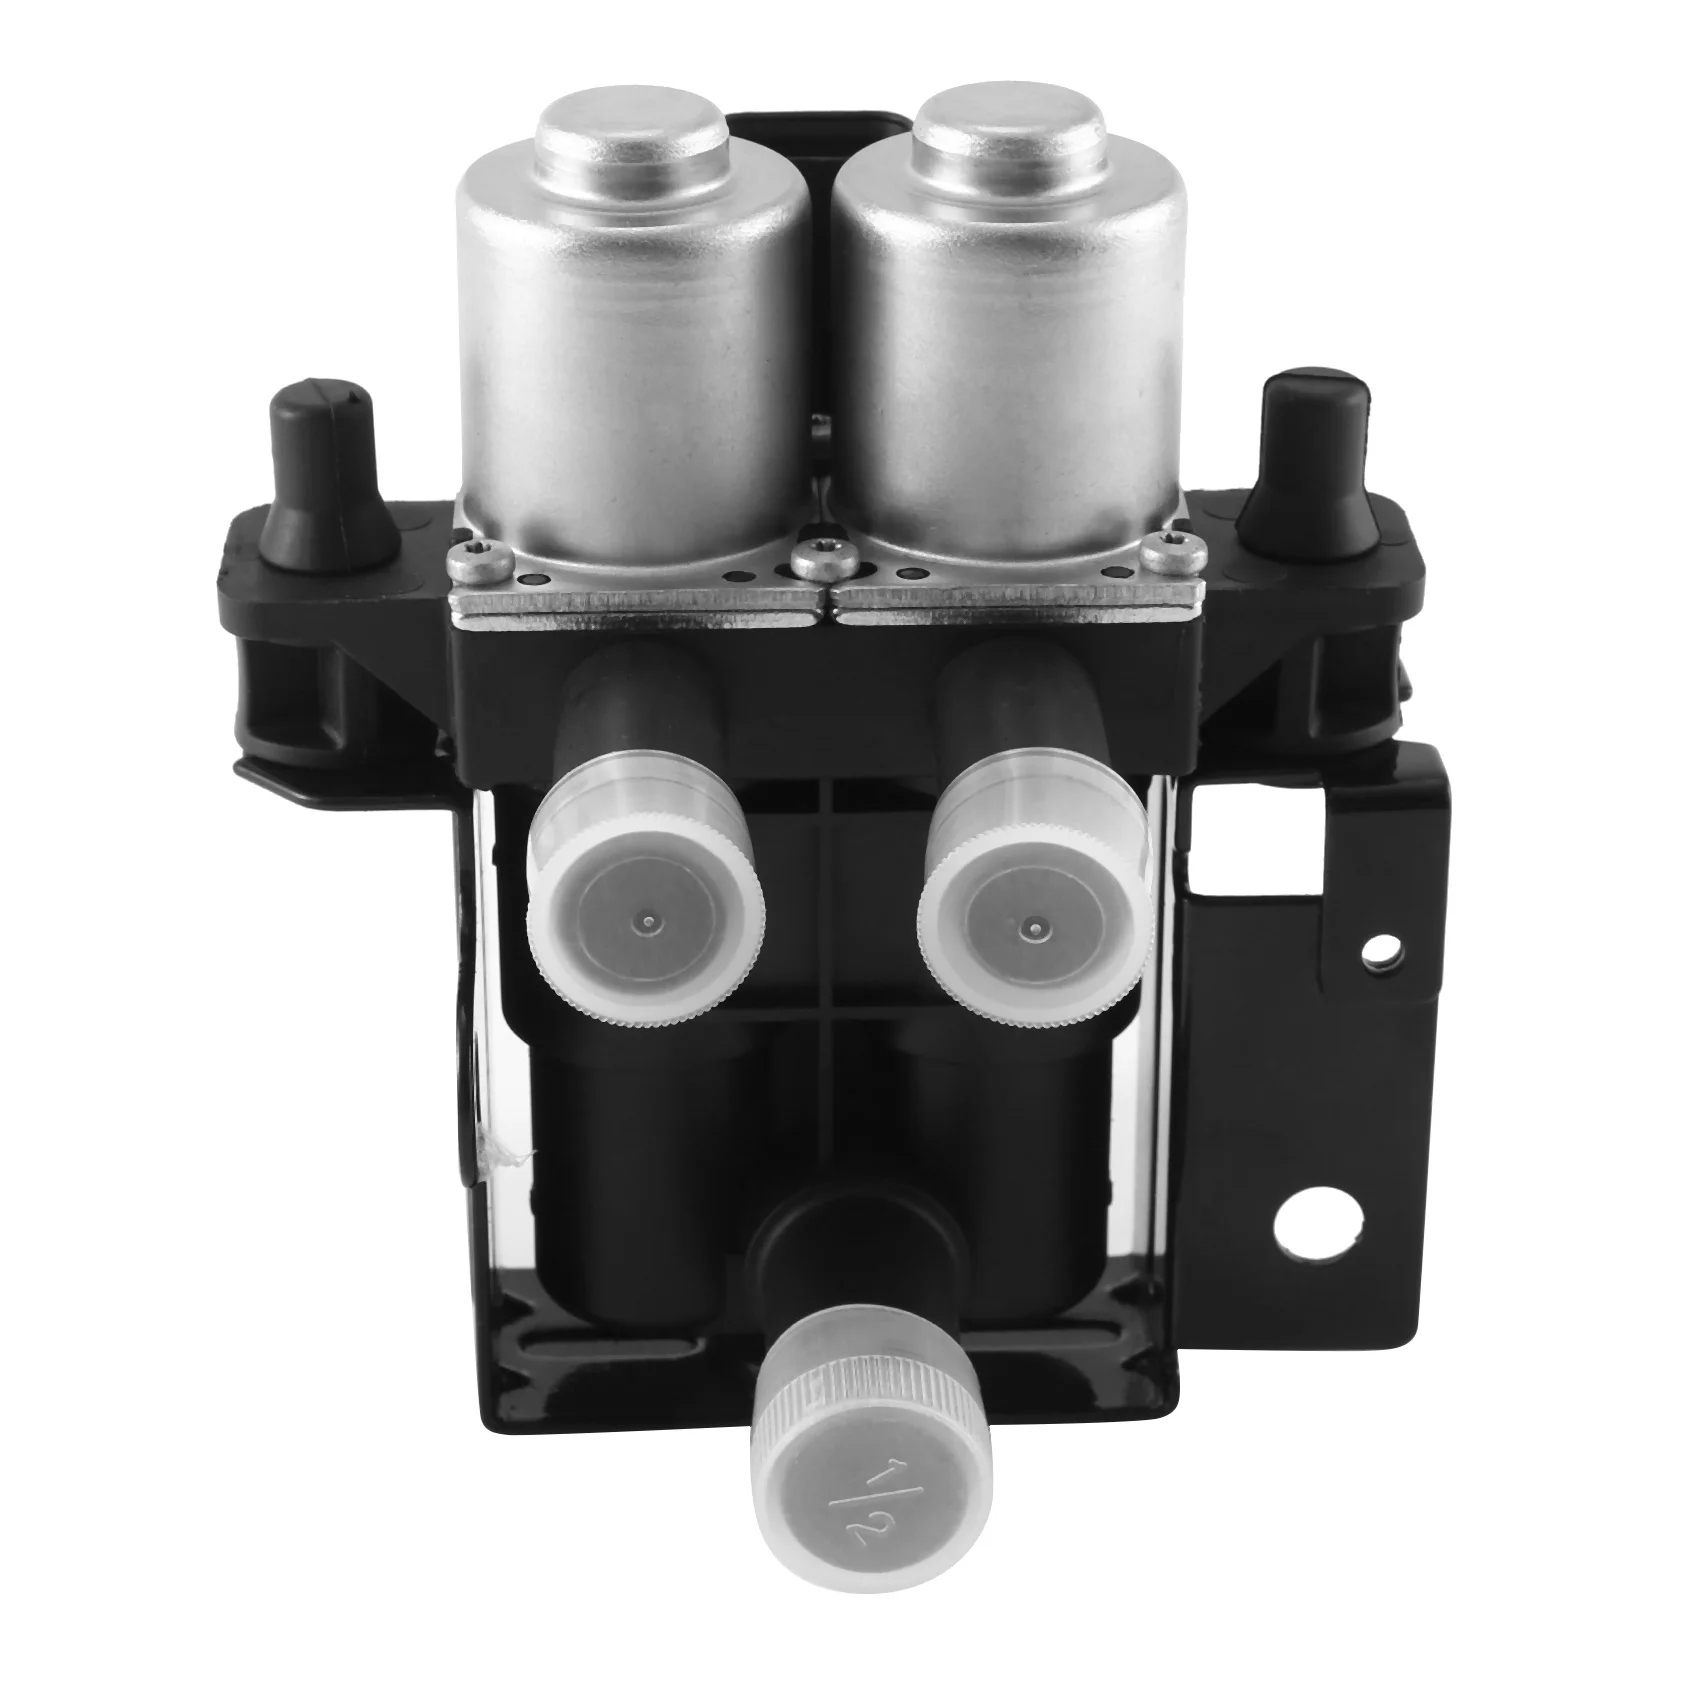 

XR822975 Car HVAC Heater Control Water Valve for S-Type